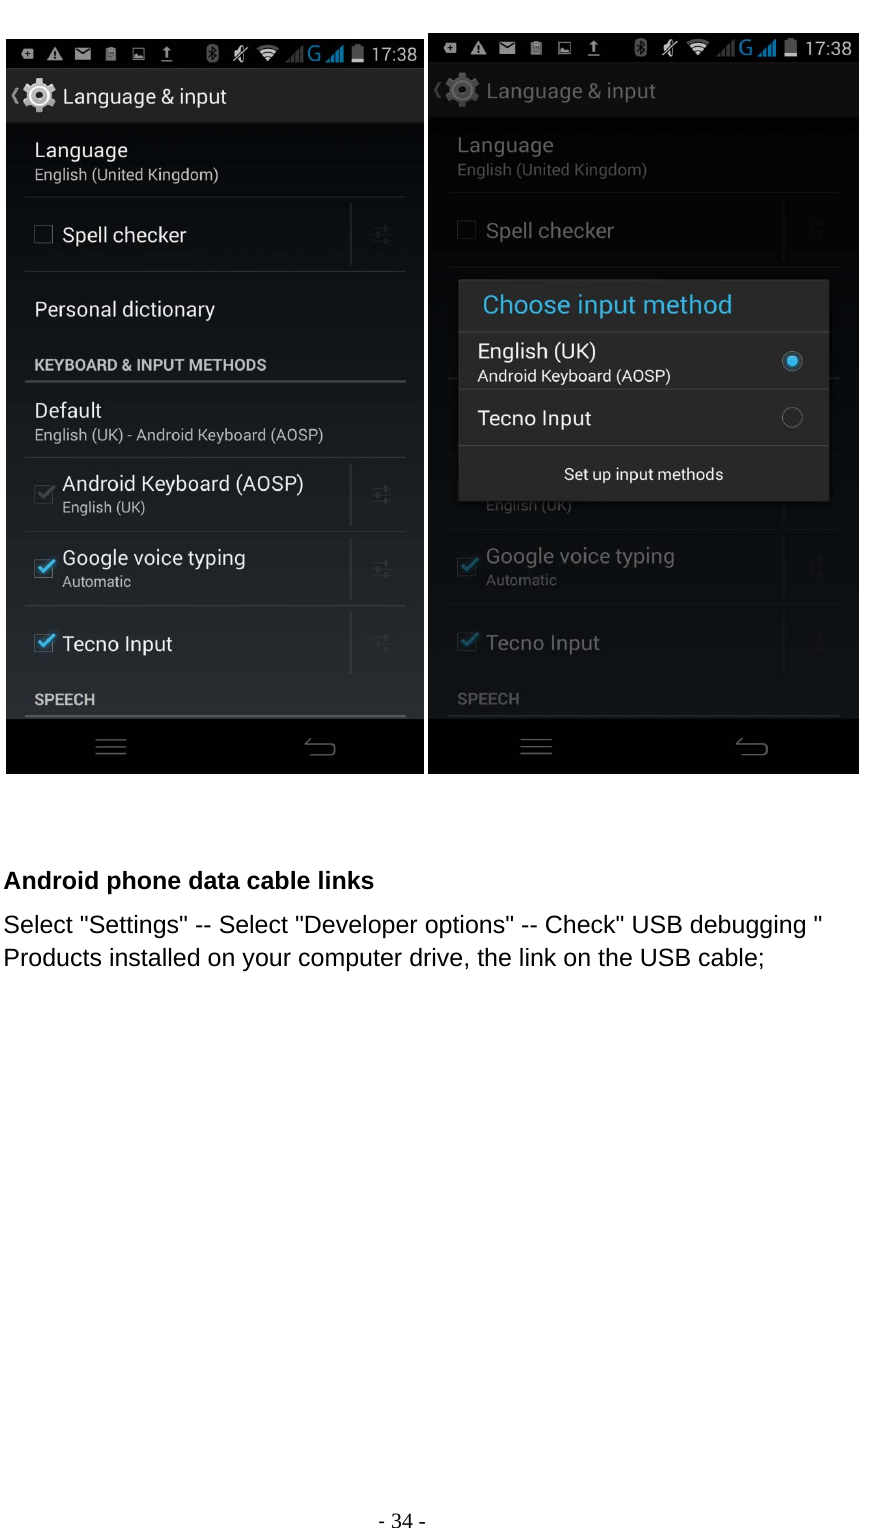                                          ‐ 34 -    Android phone data cable links Select &quot;Settings&quot; -- Select &quot;Developer options&quot; -- Check&quot; USB debugging &quot; Products installed on your computer drive, the link on the USB cable;  